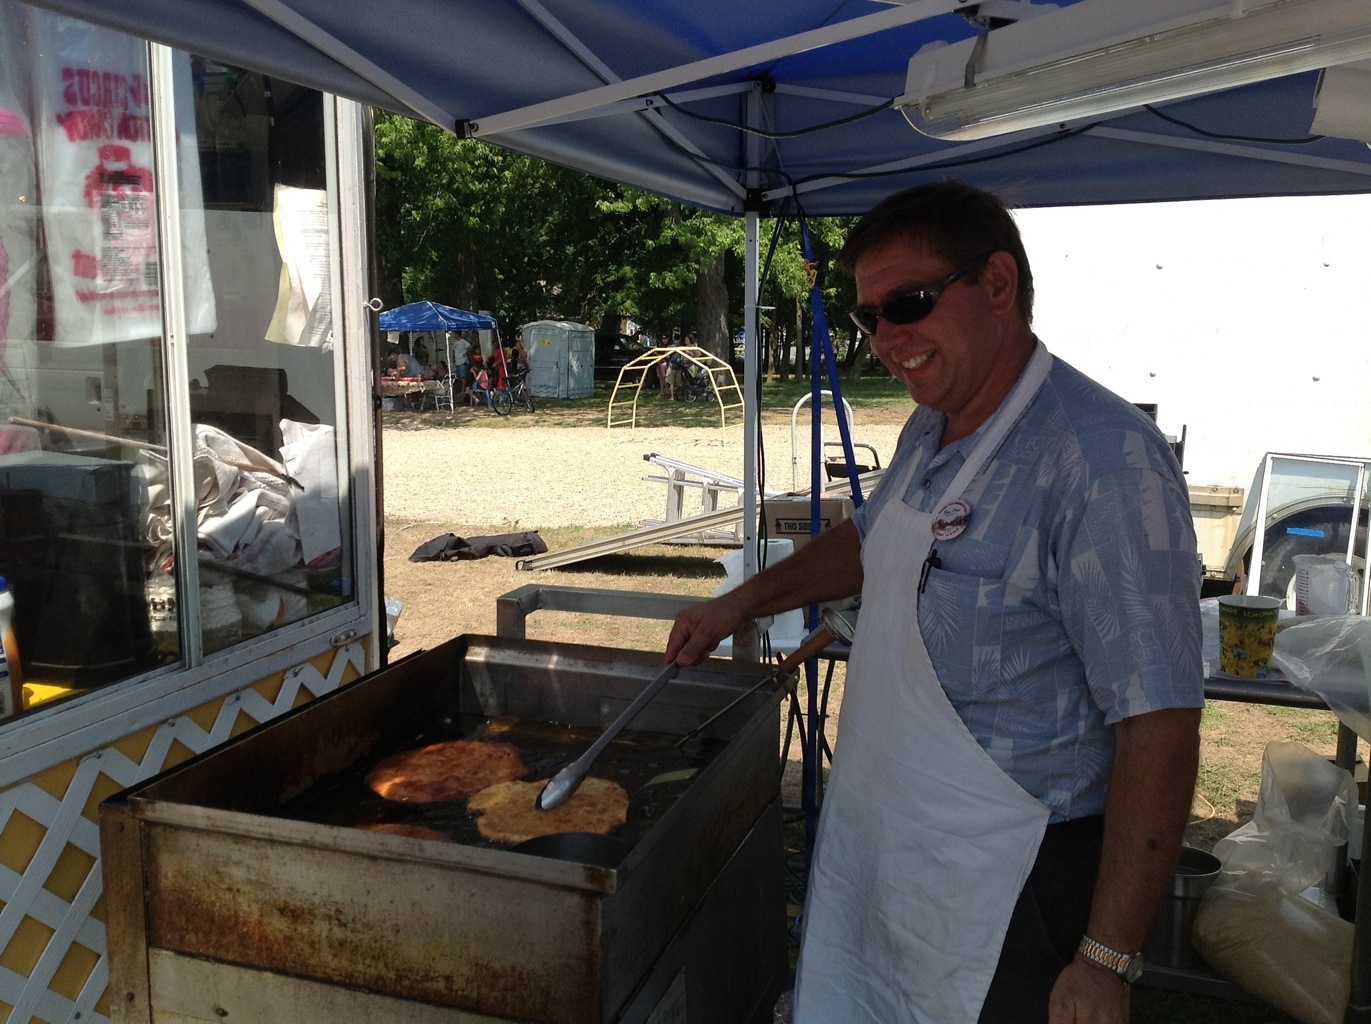 Cooking at the Bay Port Fish Sandwich Festival